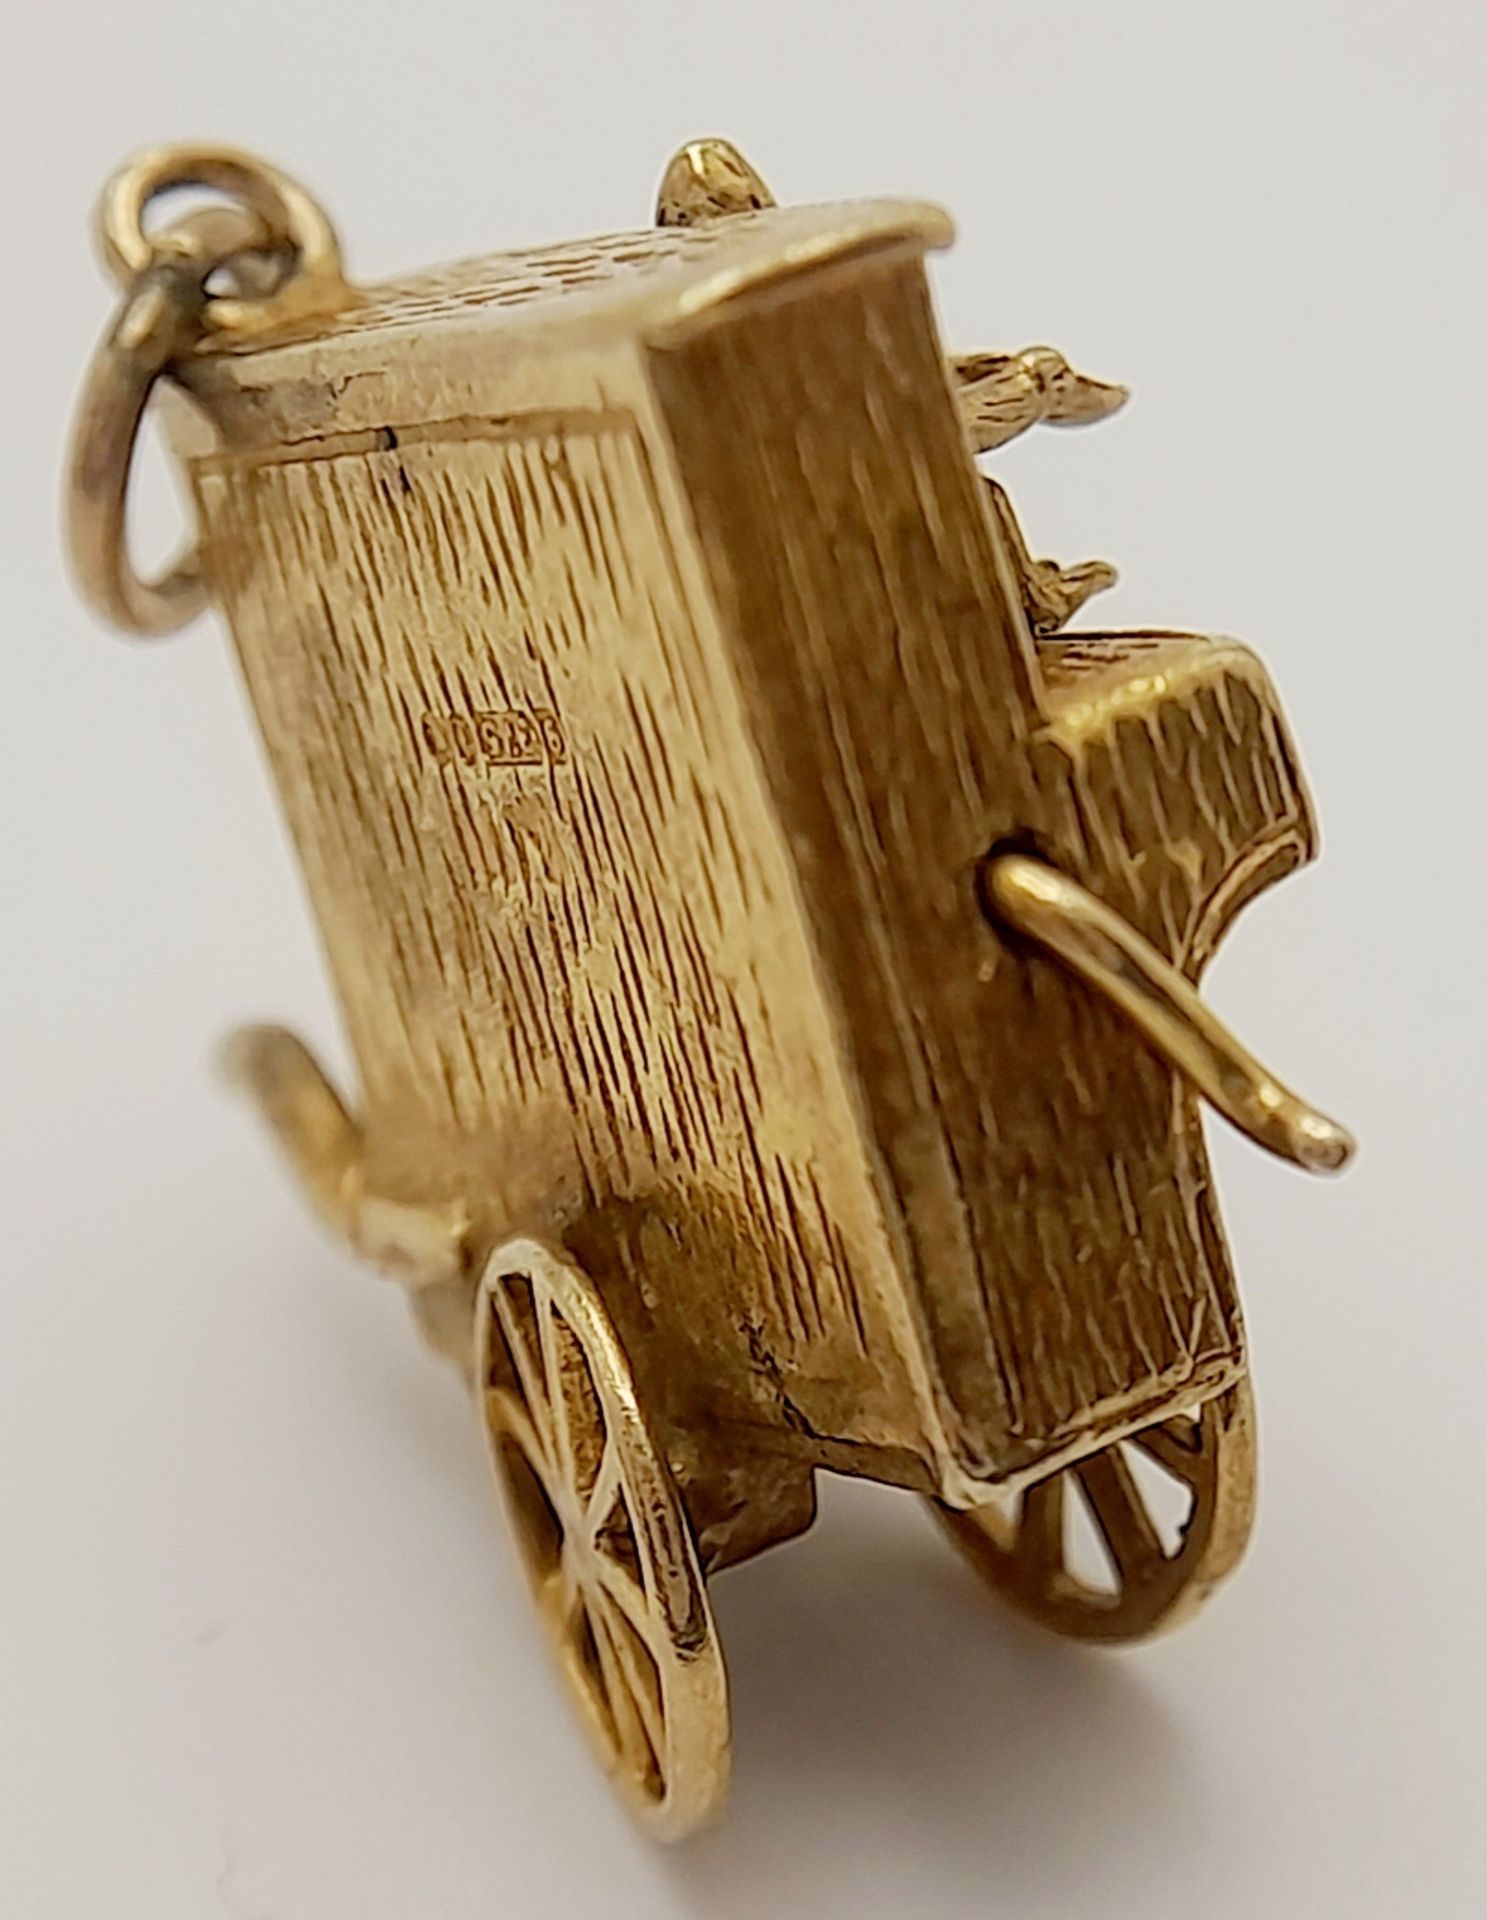 A 9K YELLOW GOLD ORGAN GRINDER AND MONKEY CHARM WITH MOVING PARTS. 2.2cm x 2.5cm, 5.2g weight. - Bild 4 aus 6